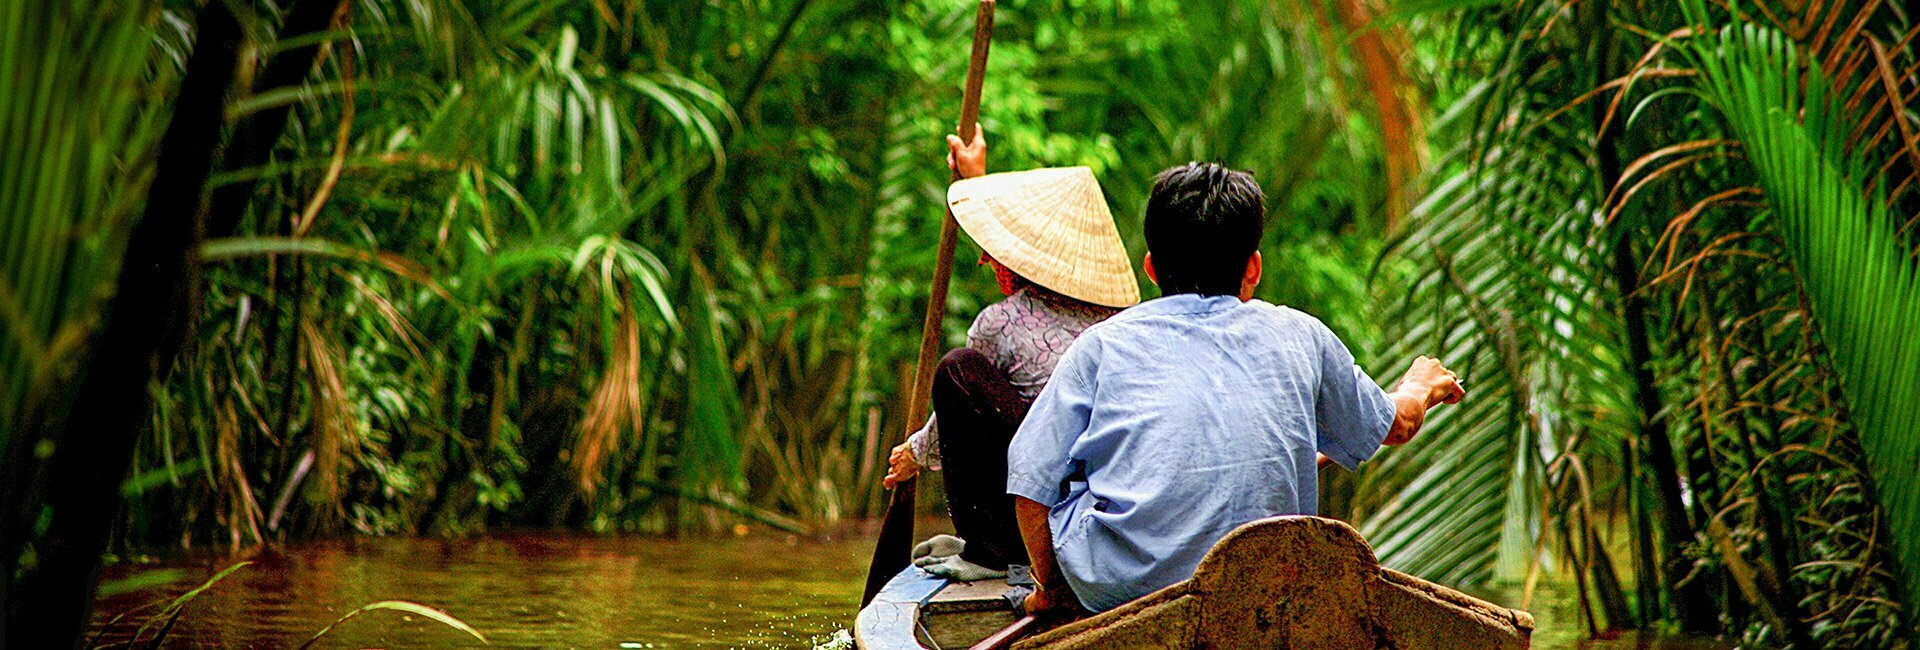 Vietnam holiday packages boat trip